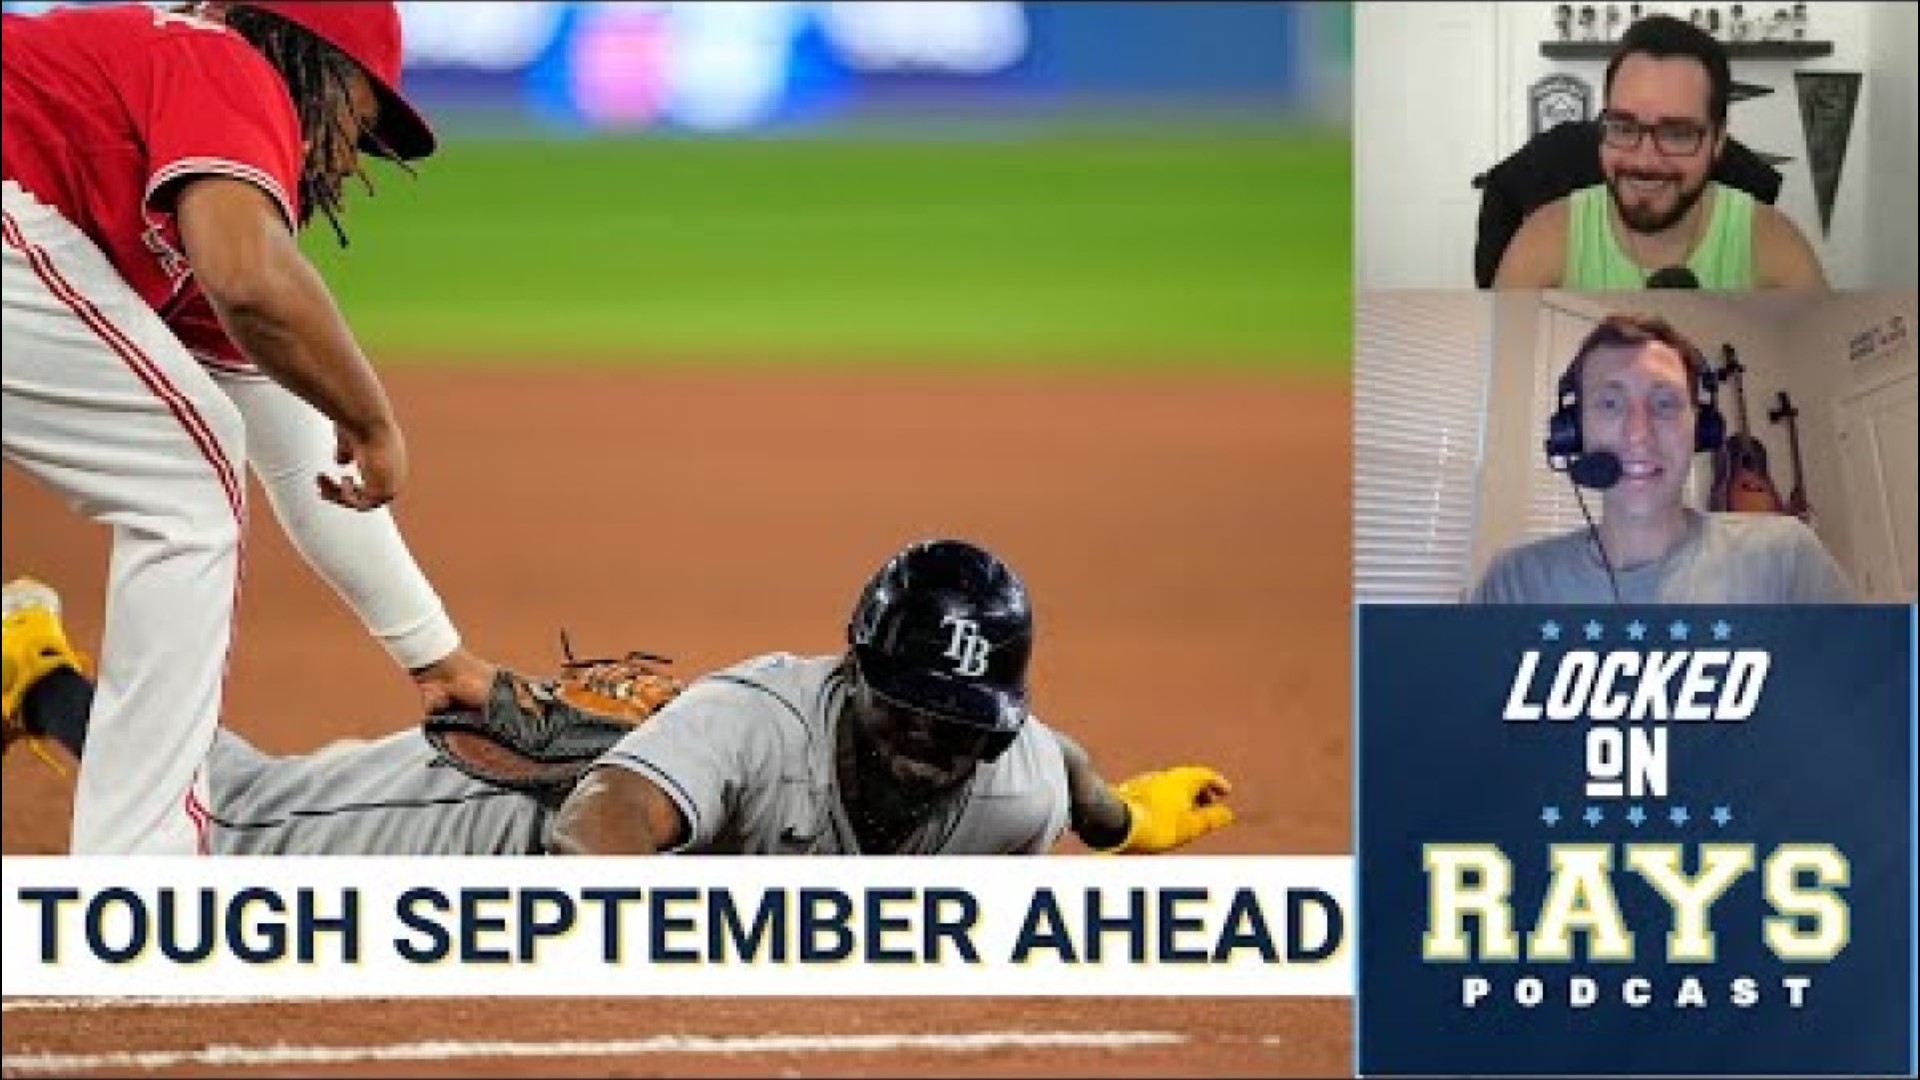 This is a mailbag episode where we will cover the Rays v Astros matchups in September and Wander Franco's face of MLB likelihood.